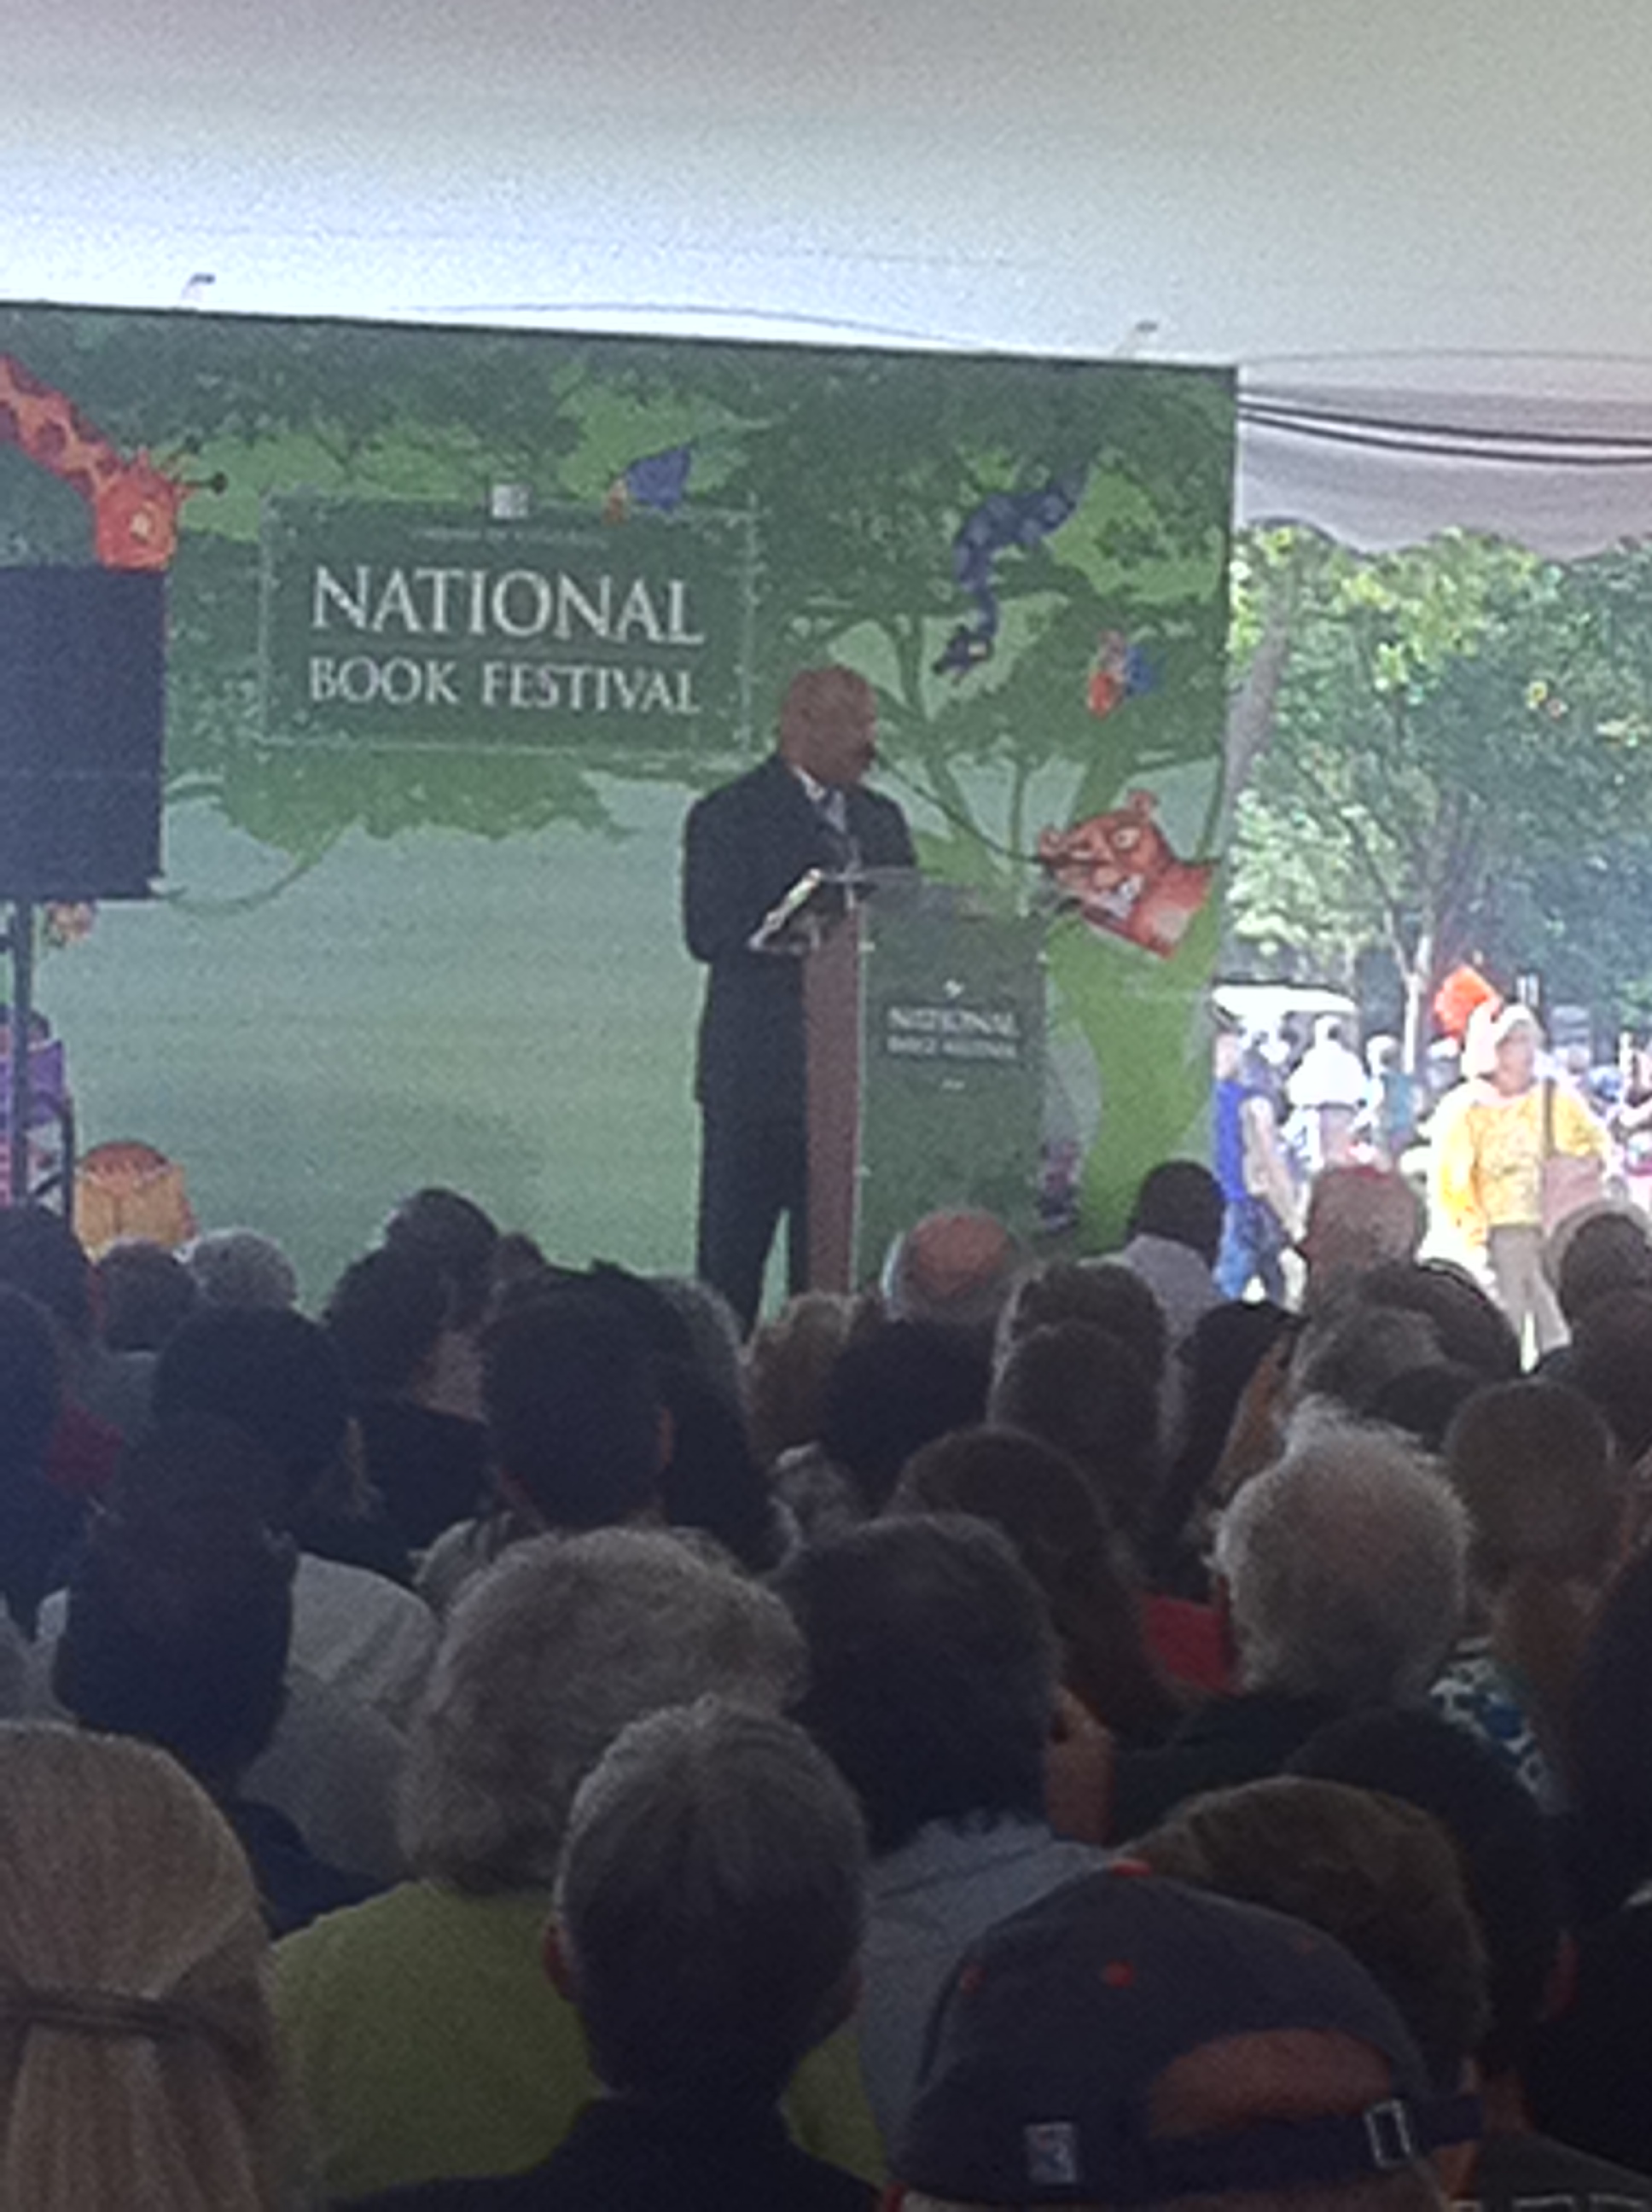 John Lewis at the National Book Festival